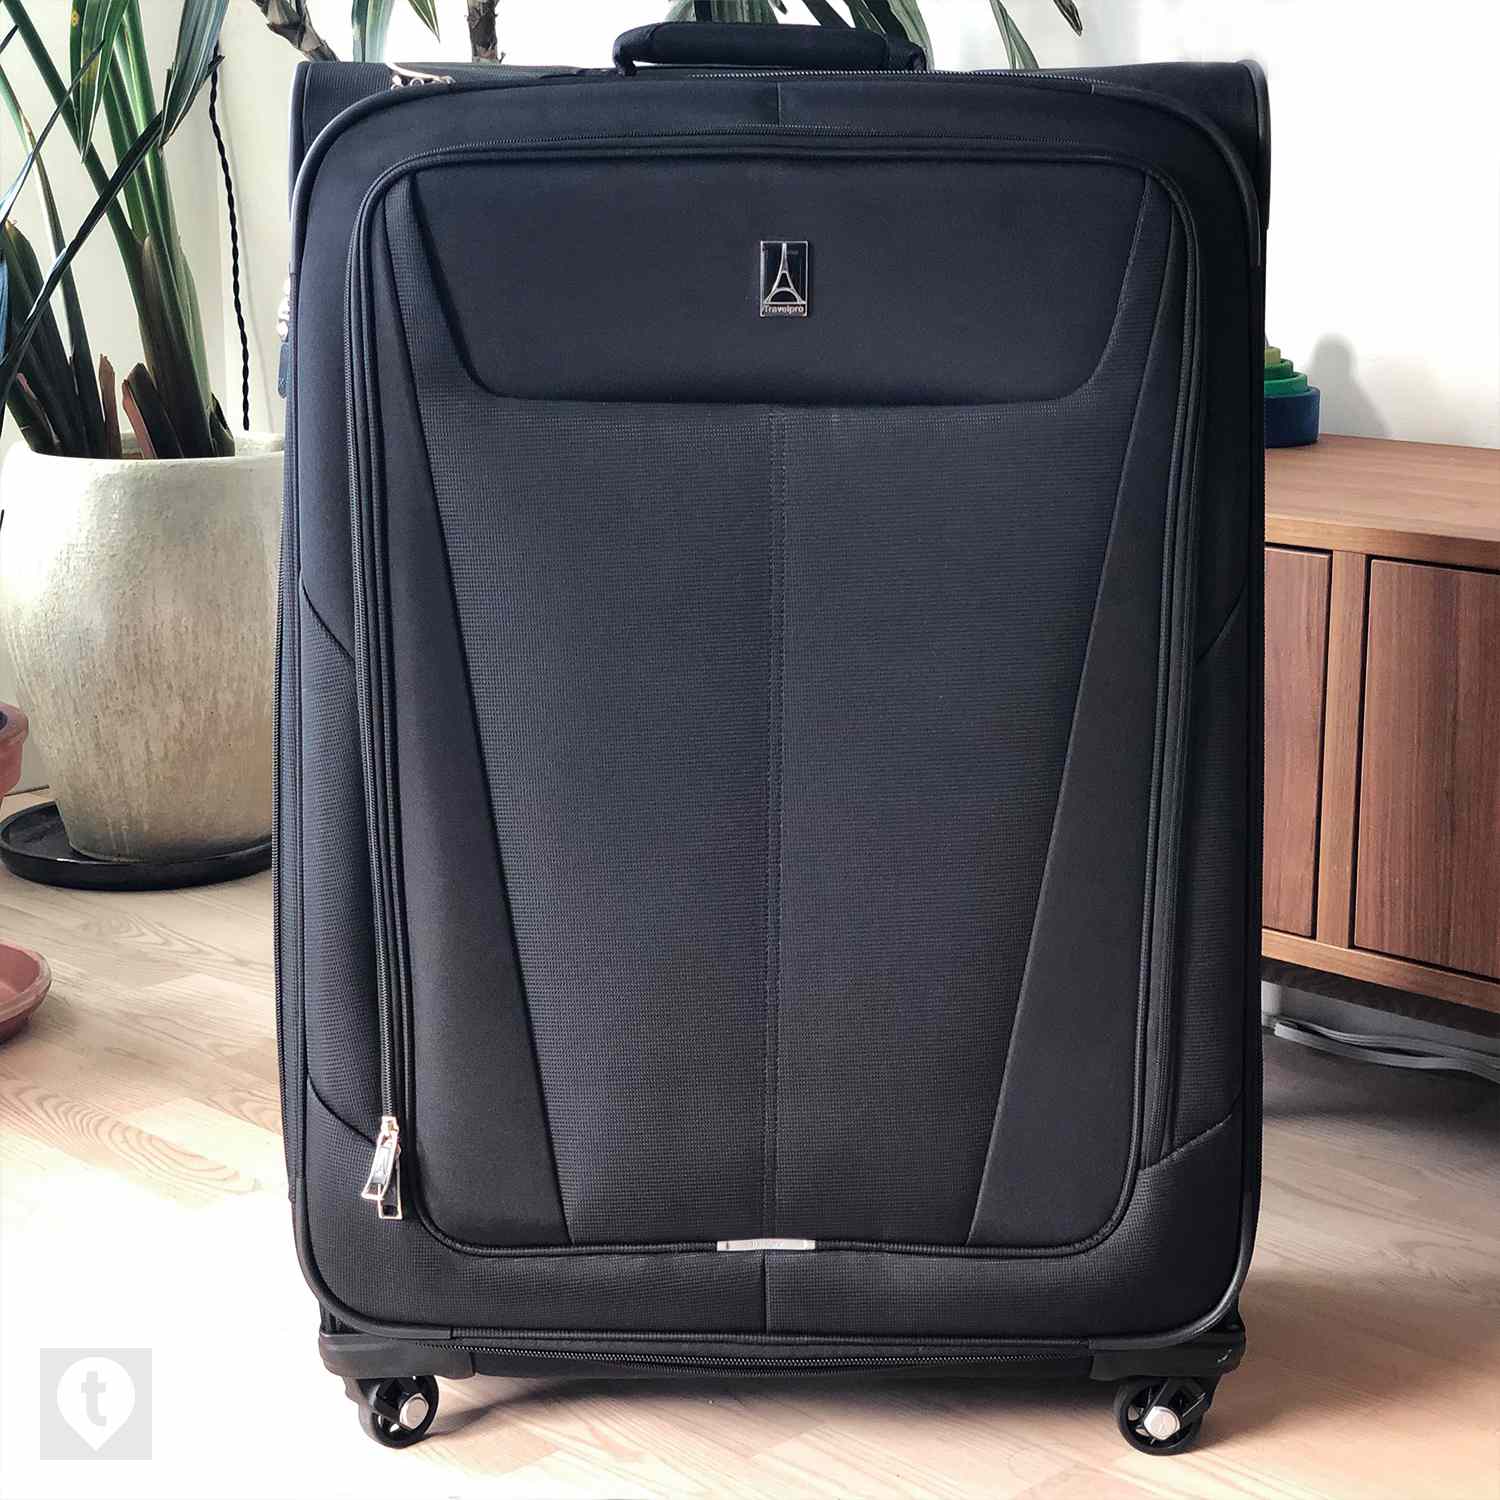 Maxlite suitcase is shown in the picture